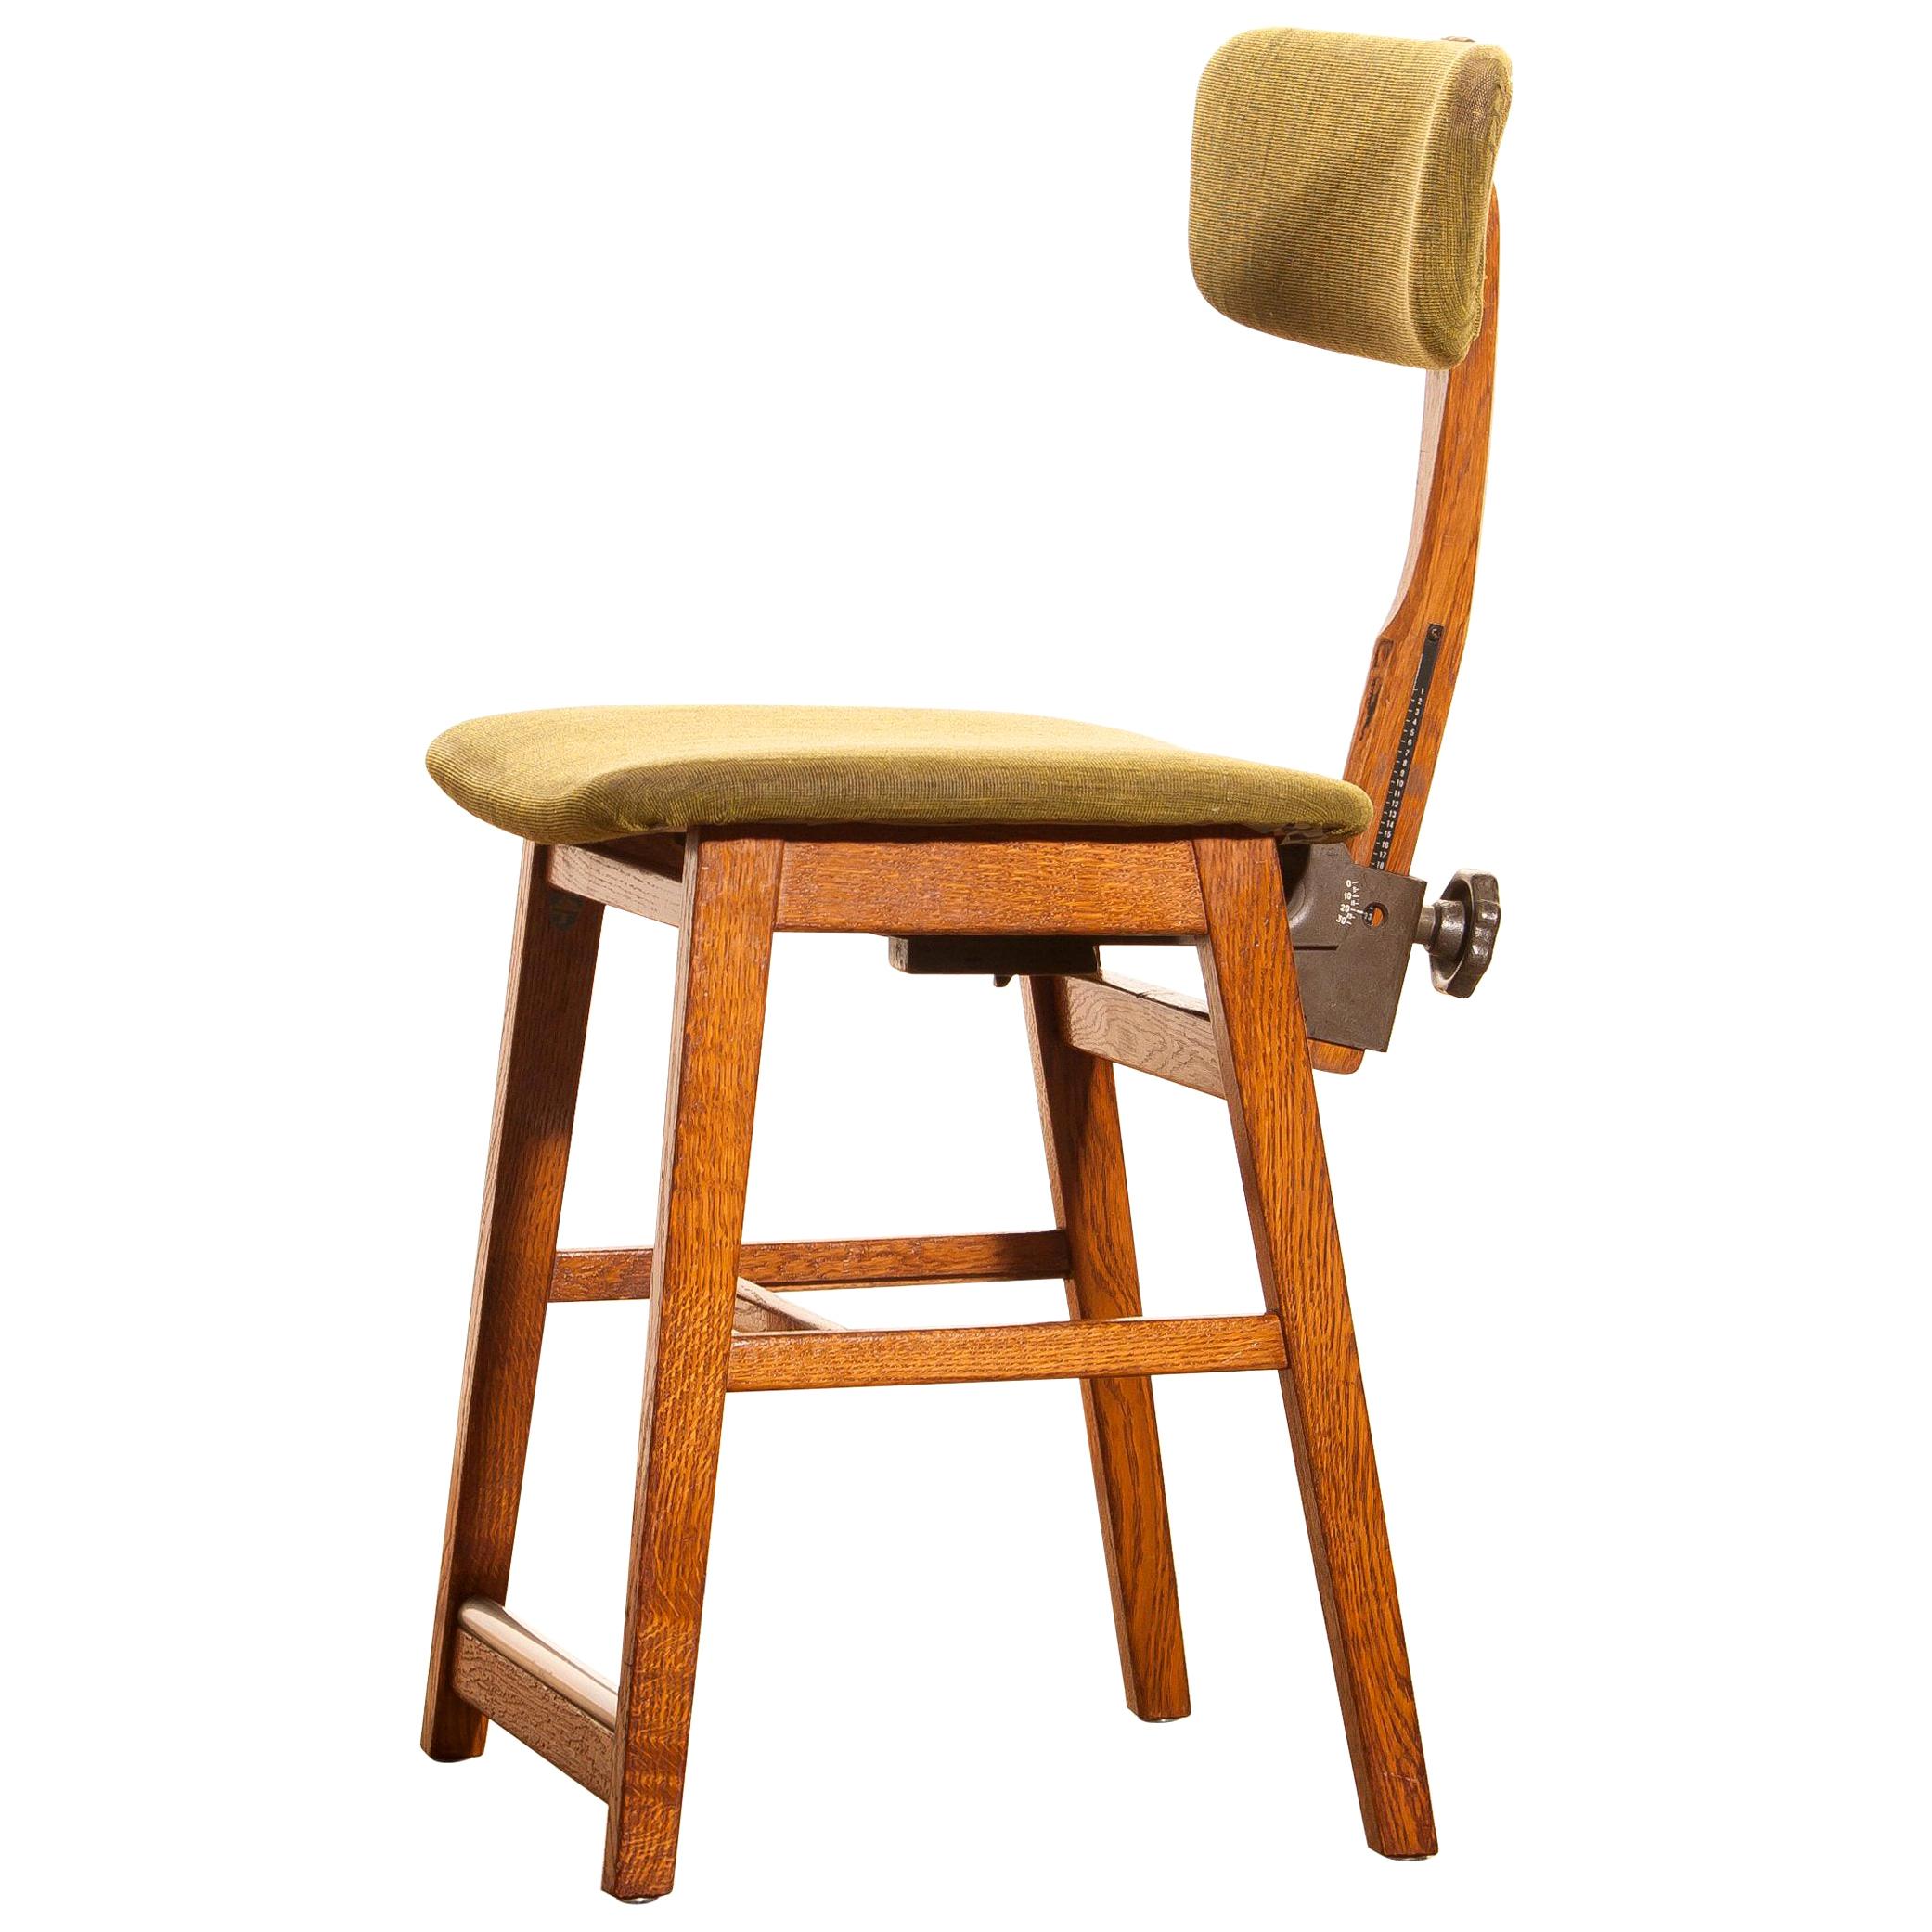 Beautiful desk chair produced and labelled by Âtvidabergs, Sweden.
This chair is made of an oak frame with strong fabric upholstered seating.
The backrest is adjustable in height and can be tilted.
It is in good condition.
Dimensions: H 86 cm, W